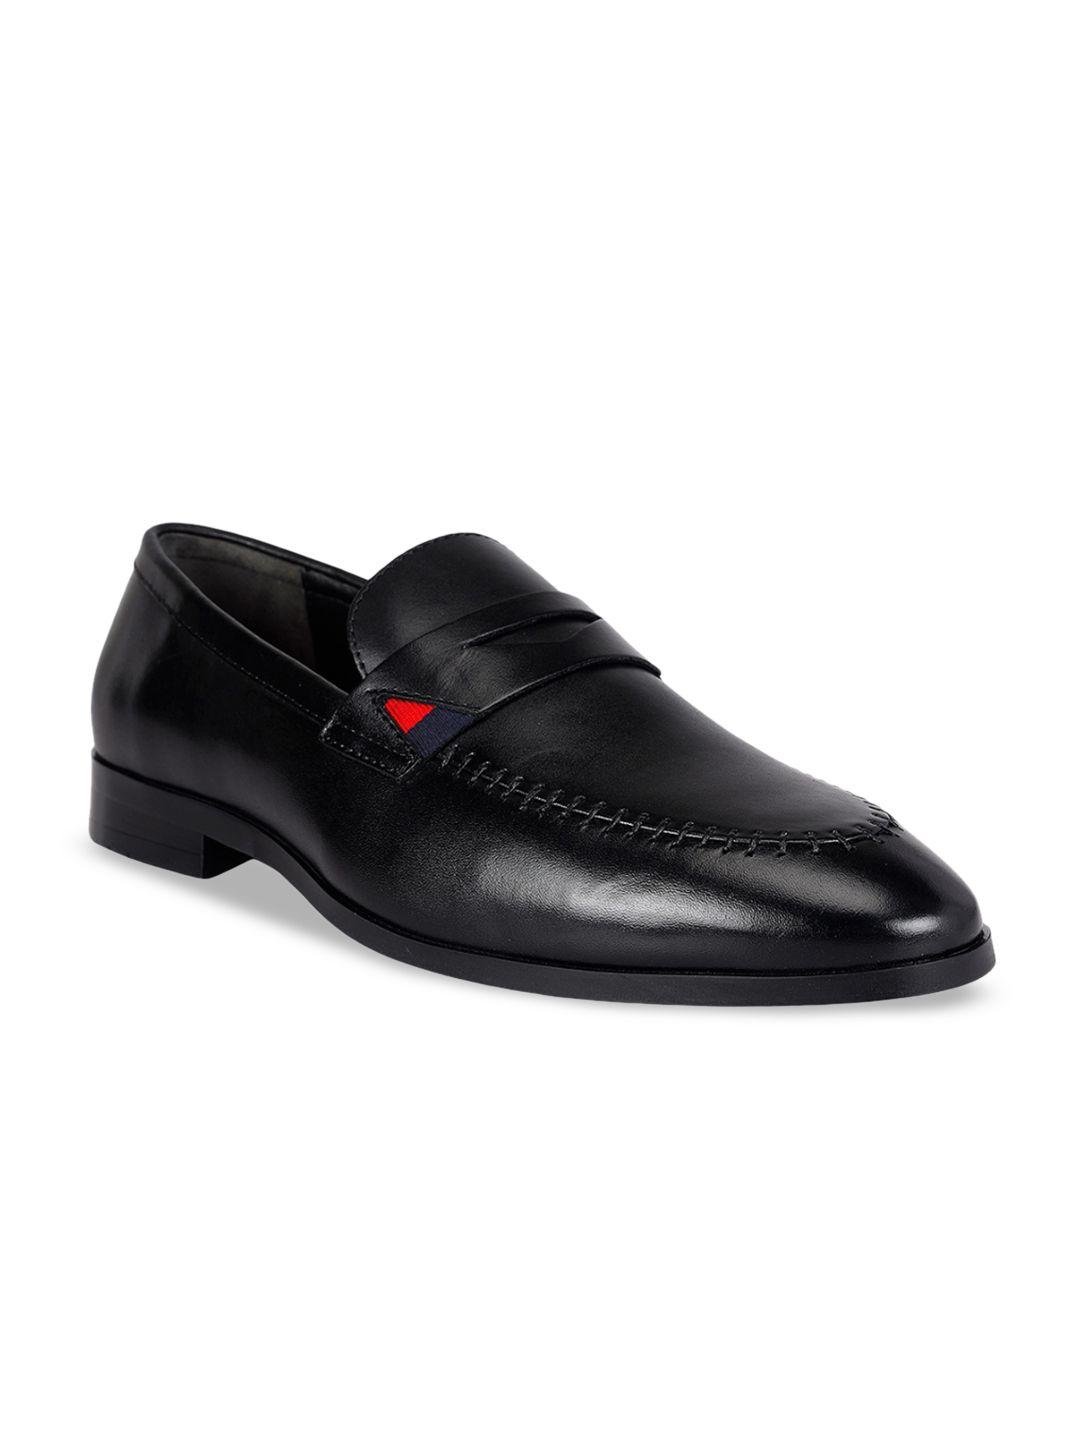 ROSSO BRUNELLO Men Leather Formal Penny Loafers